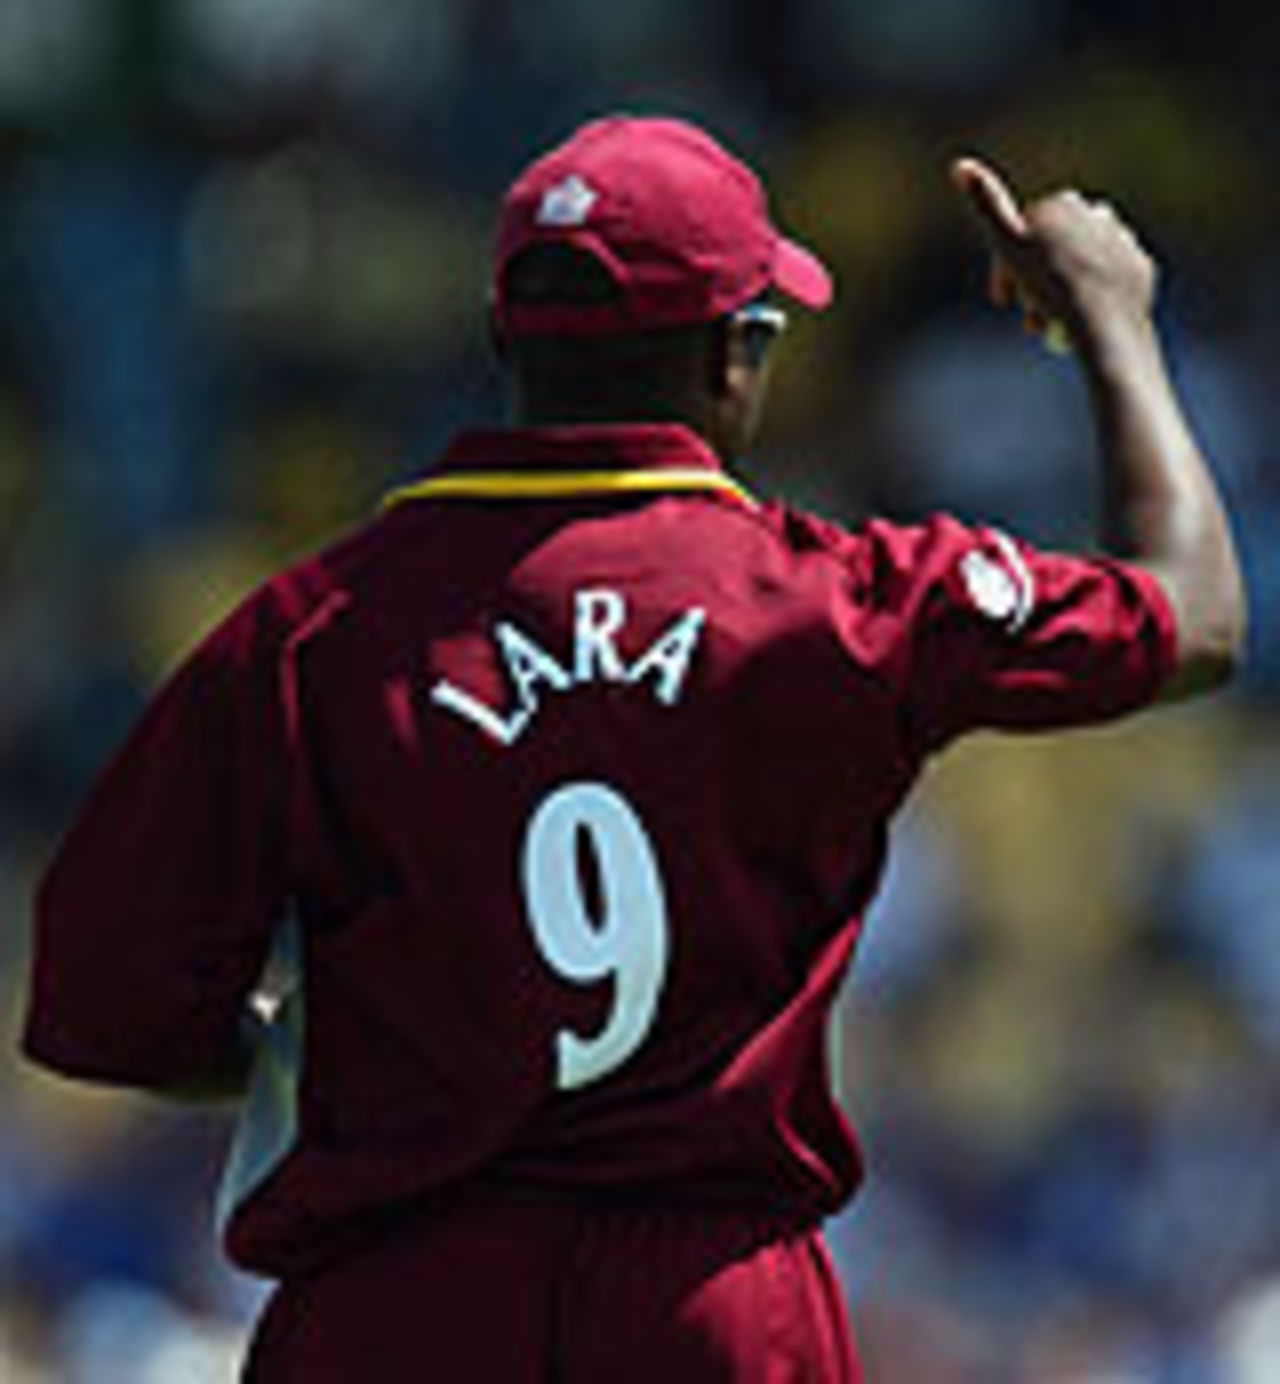 Brian Lara gives the thumbs up, sixth odi, St Lucia, West Indies v England, May 2, 2004